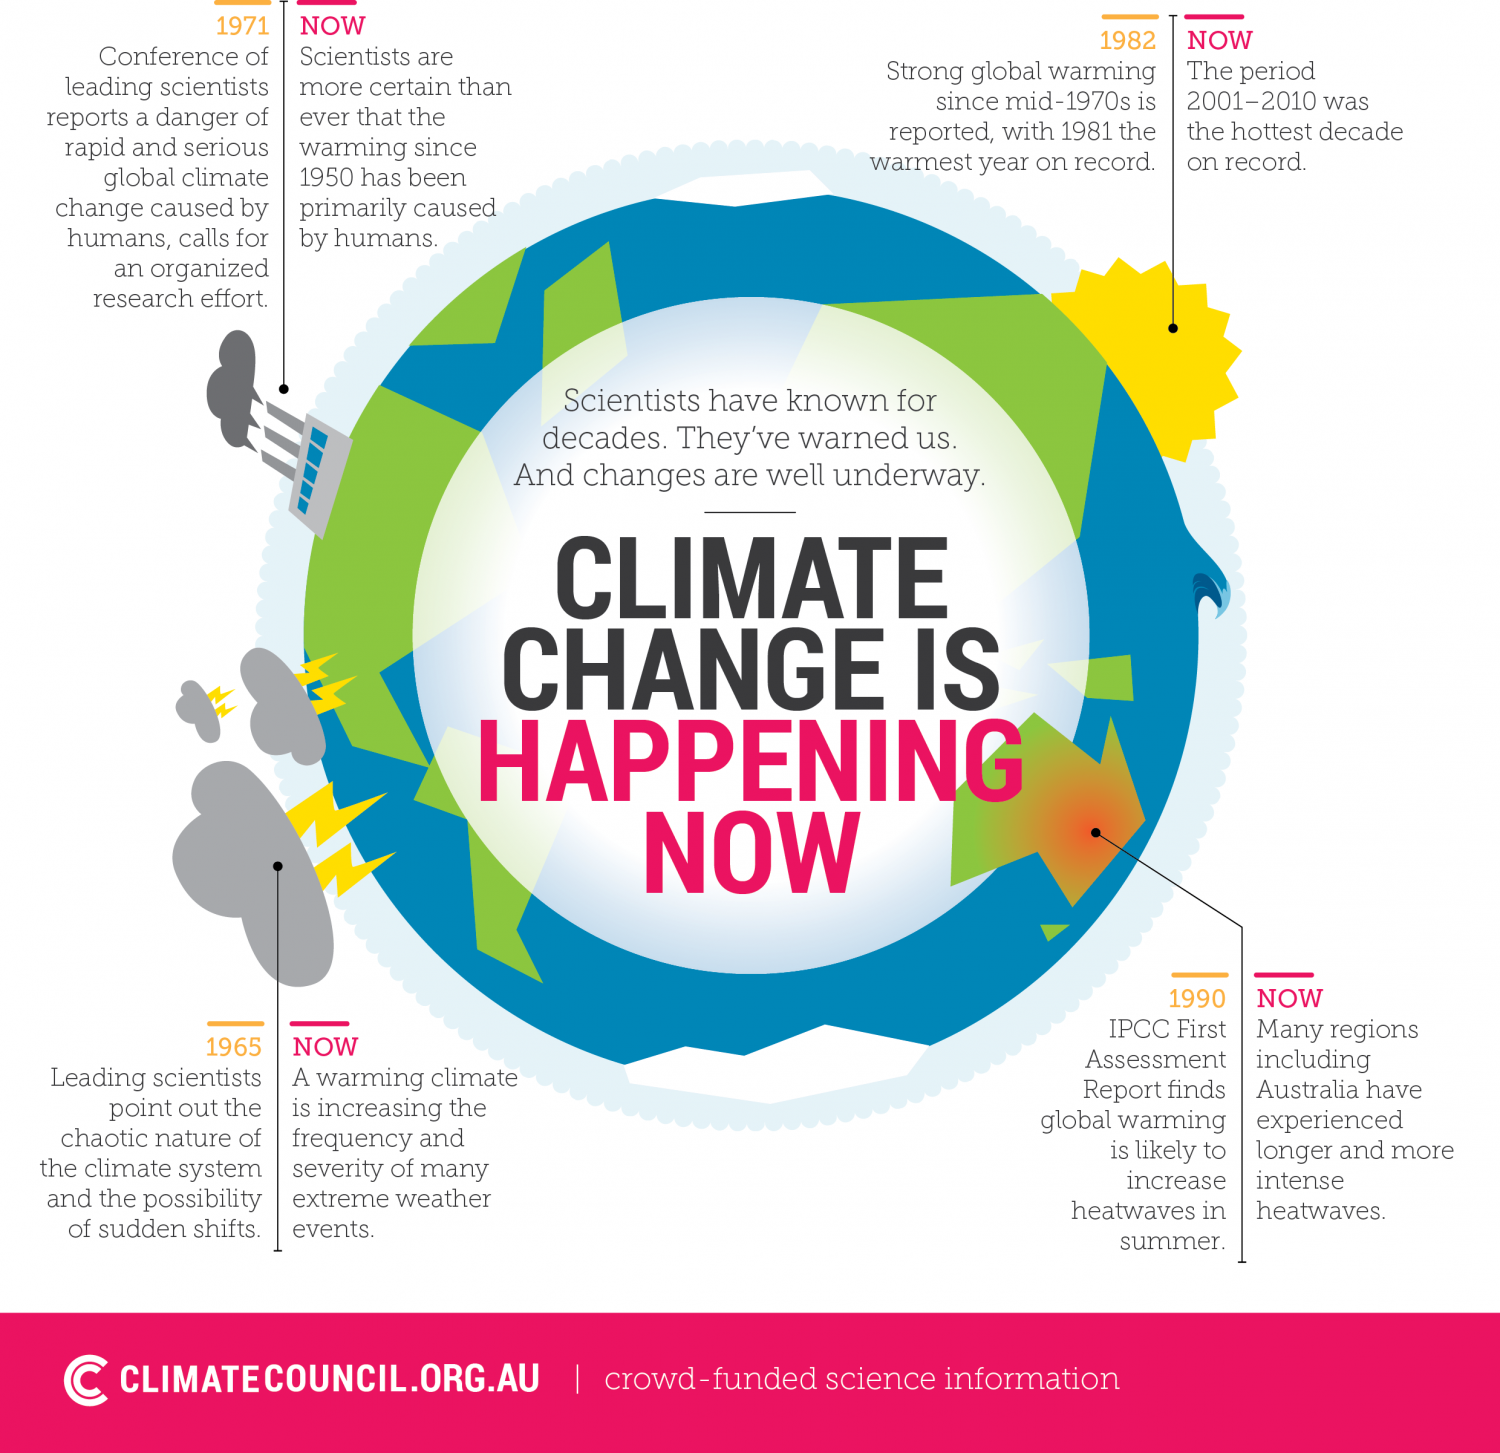 Global Warming Infographic